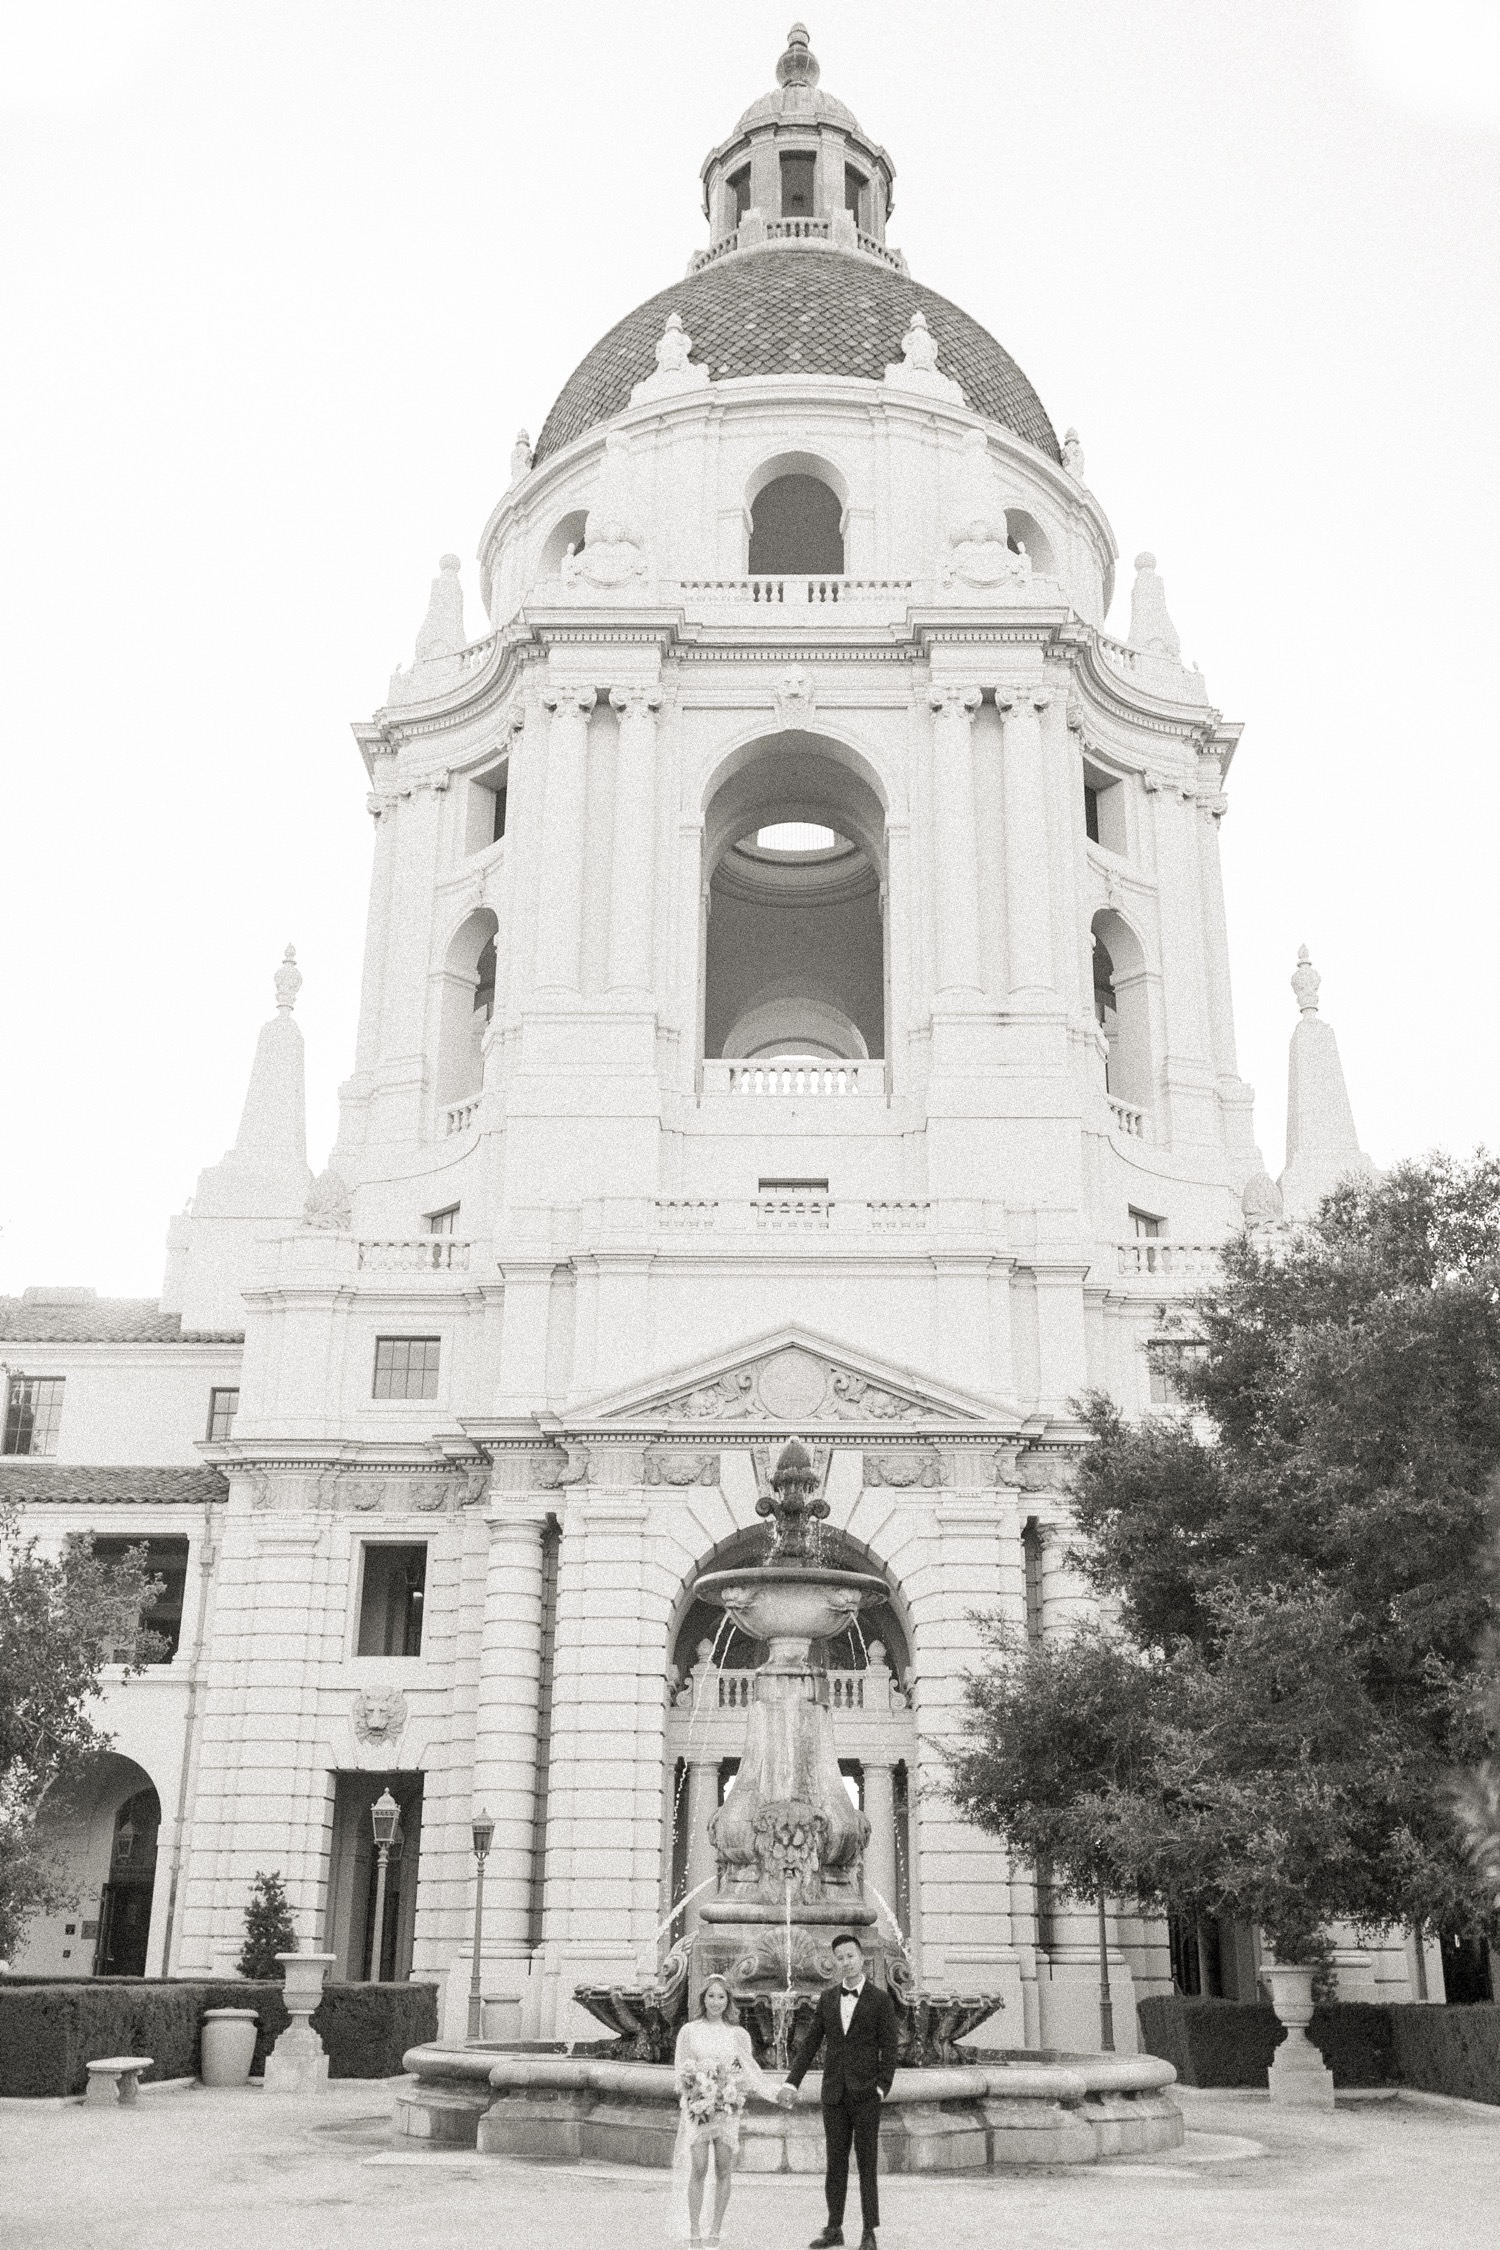 How to have a wedding ceremony at pasadena city hall, pasadena city hall wedding, pasadena wedding, wedding at pasadena city hall, courthouse wedding in pasadena, courthouse wedding at pasadena city hall, city hall wedding at the pasadena courthouse, elopement wedding at pasadena city hall, intimate wedding at pasadena city hall, intimate wedding in pasadena california, elopement wedding in pasadena, pasadena elopement, pasadena intimate wedding, intimate wedding in pasadena, wedding in LA